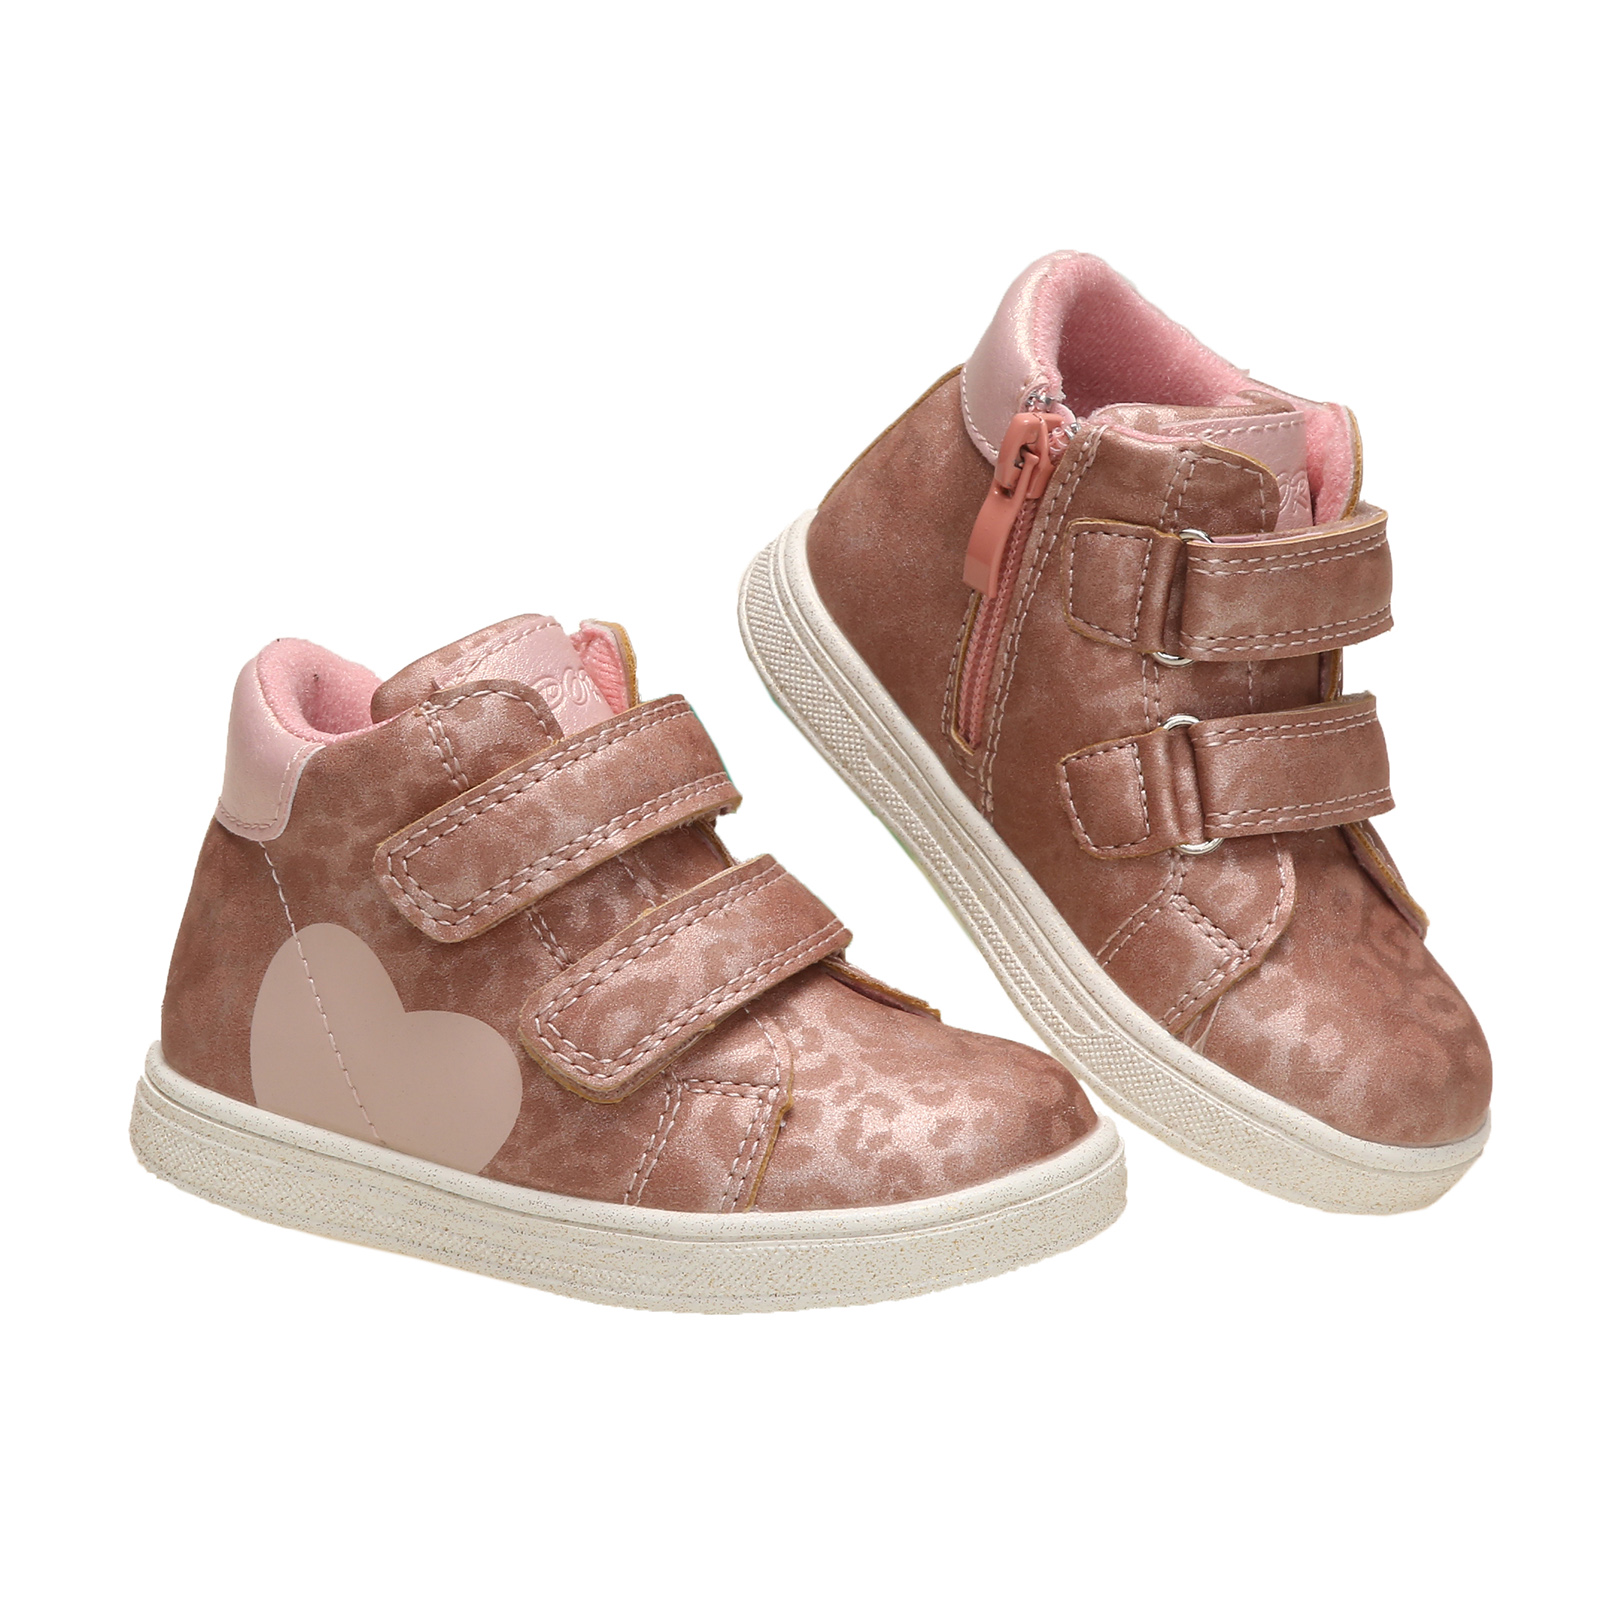 Toddler-Sports-Shoes-Children-S-Casual-Shoes-Girls-Non-Slip-Running-Shoes-Autumn-And-Winter-Warm-2